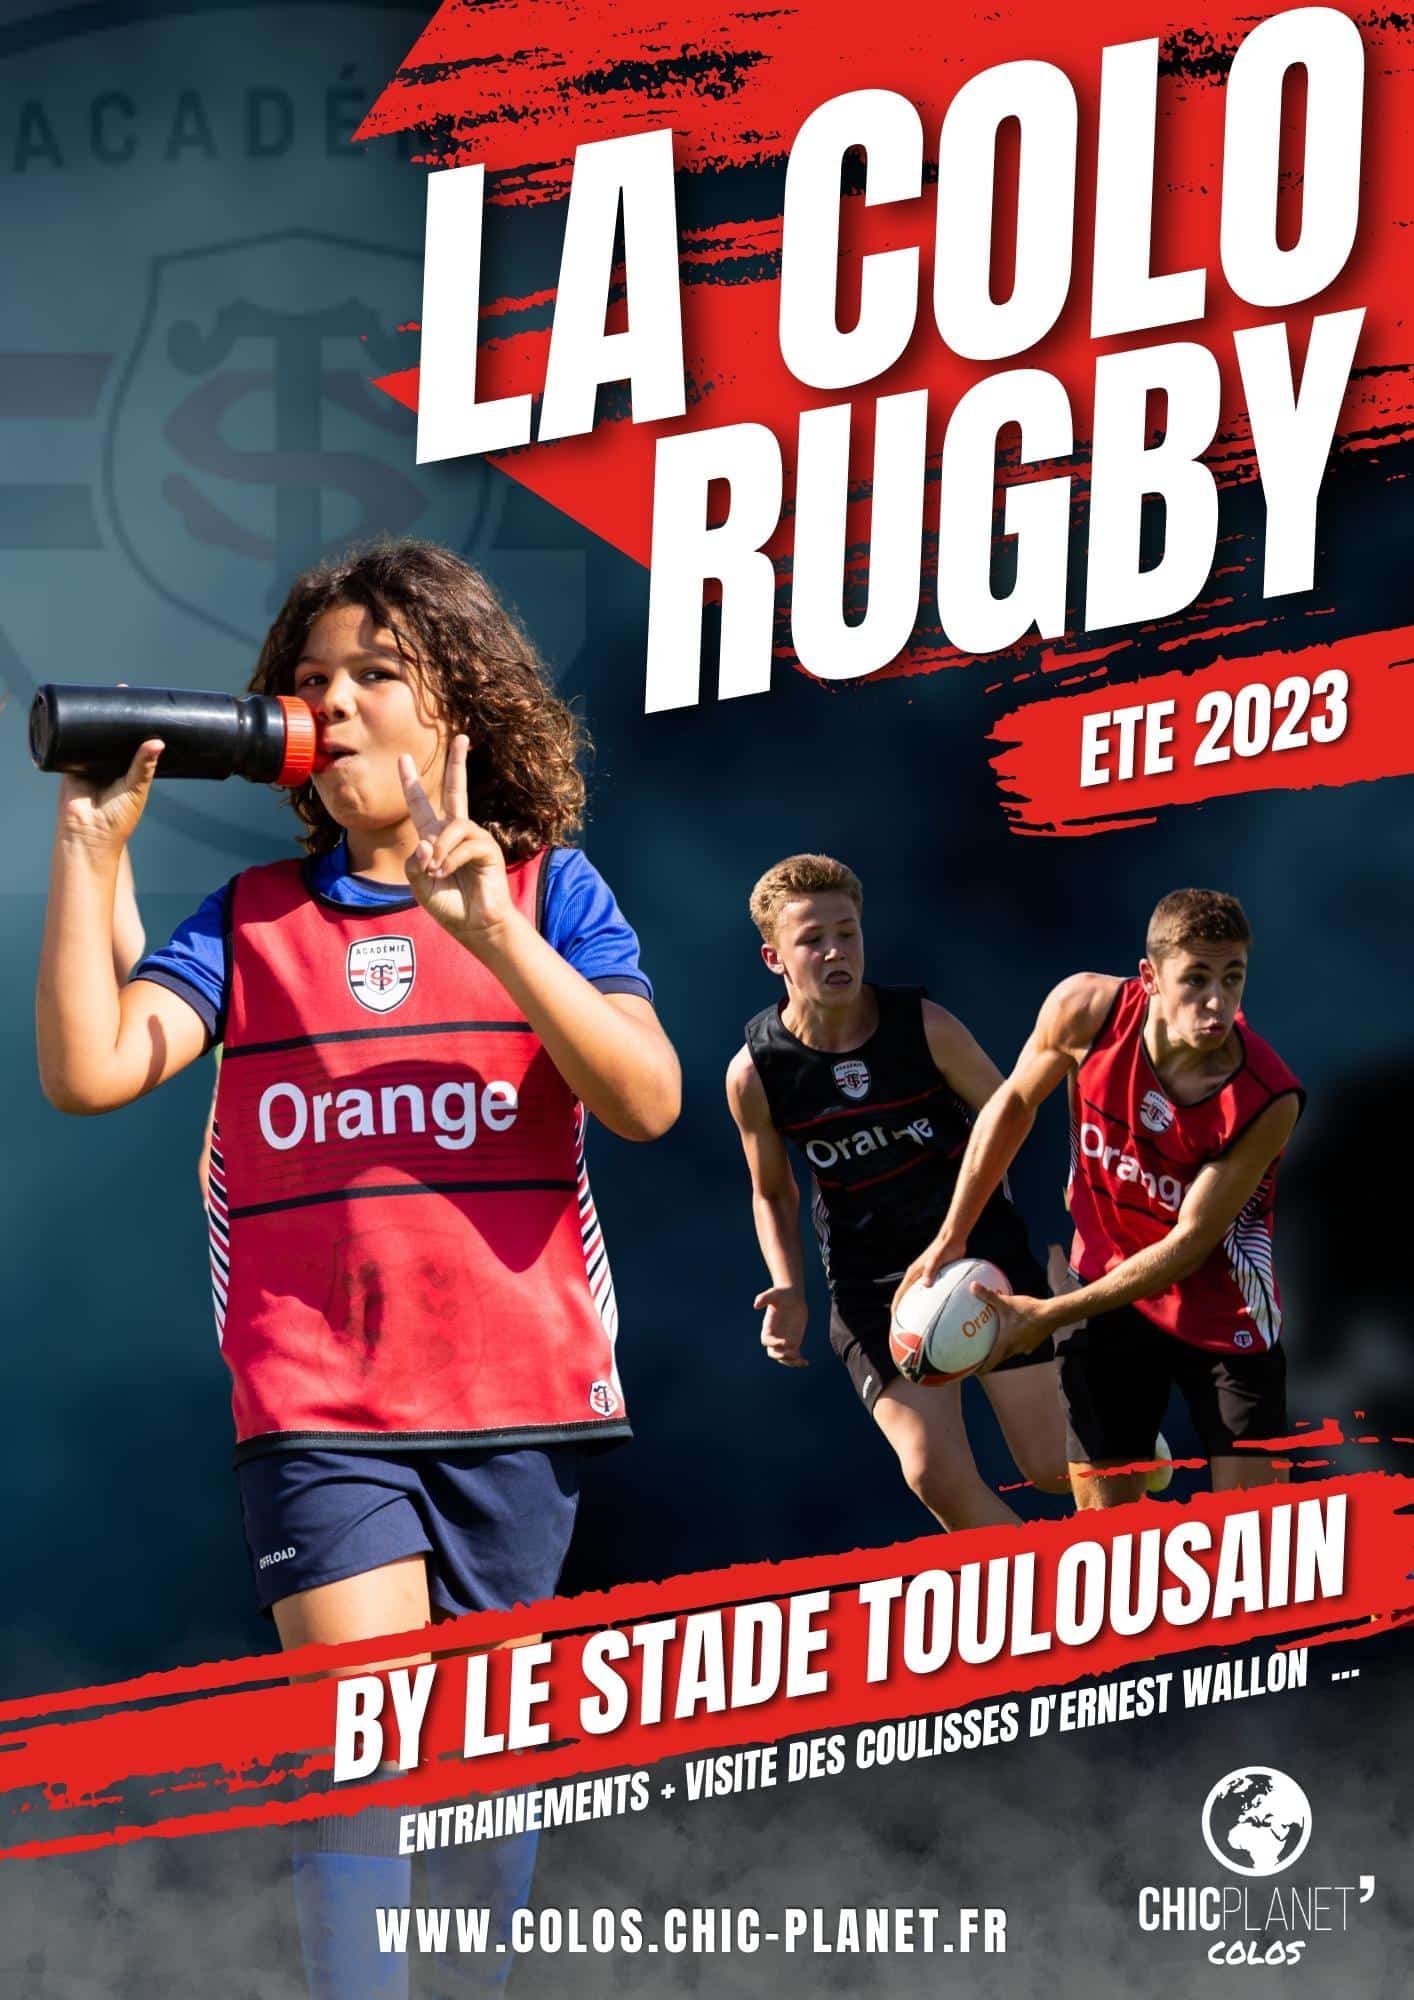 stade toulousain rugby